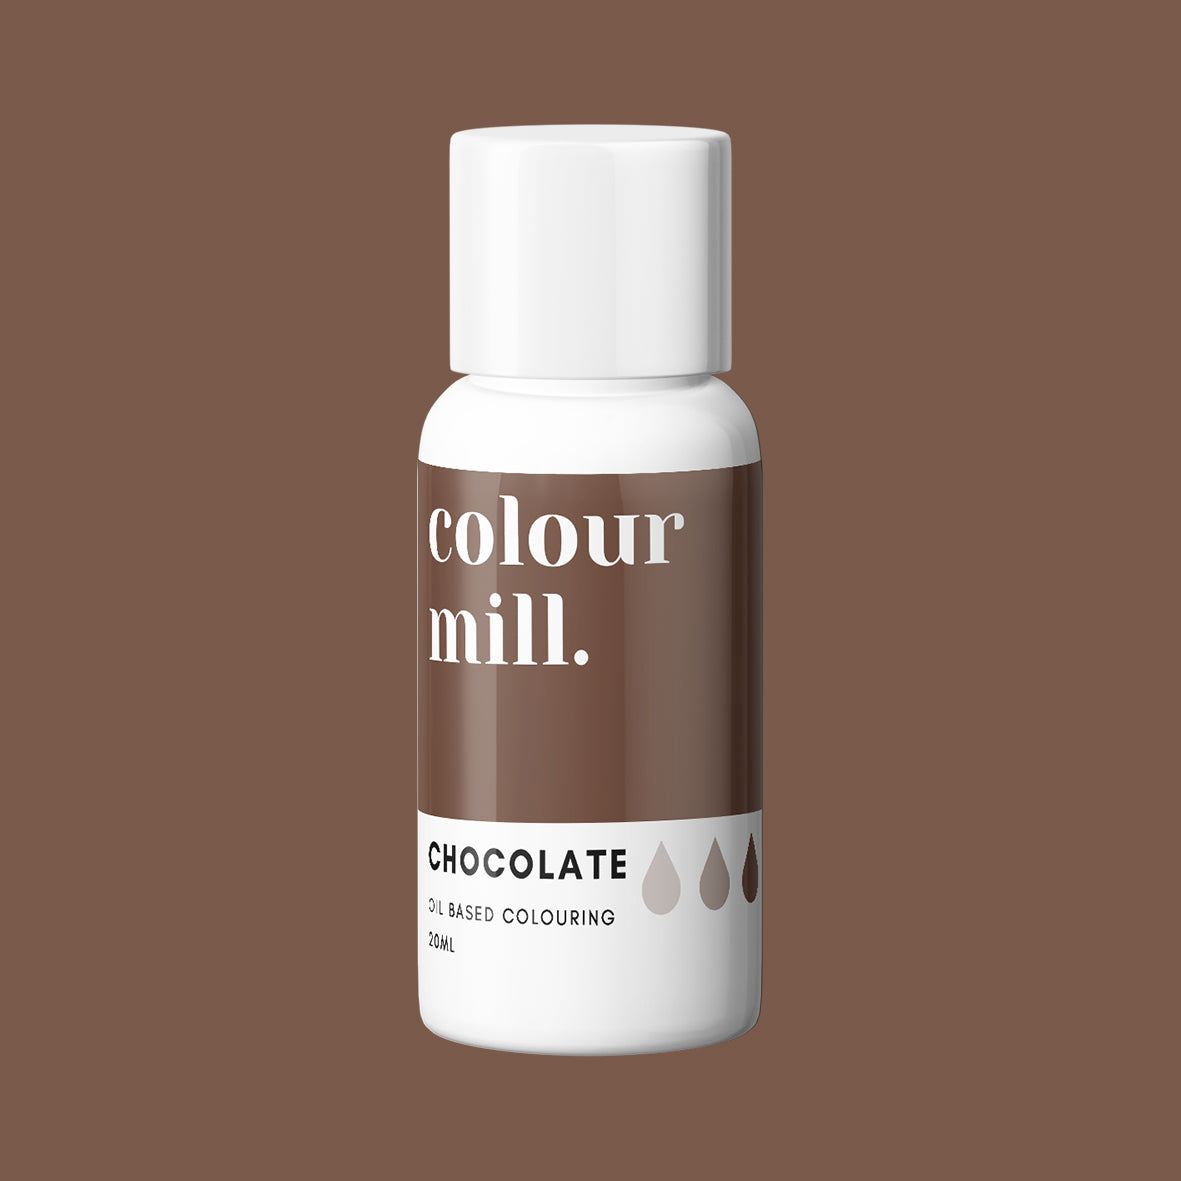 CHOCOLATE oil based concentrated icing colouring 20ml